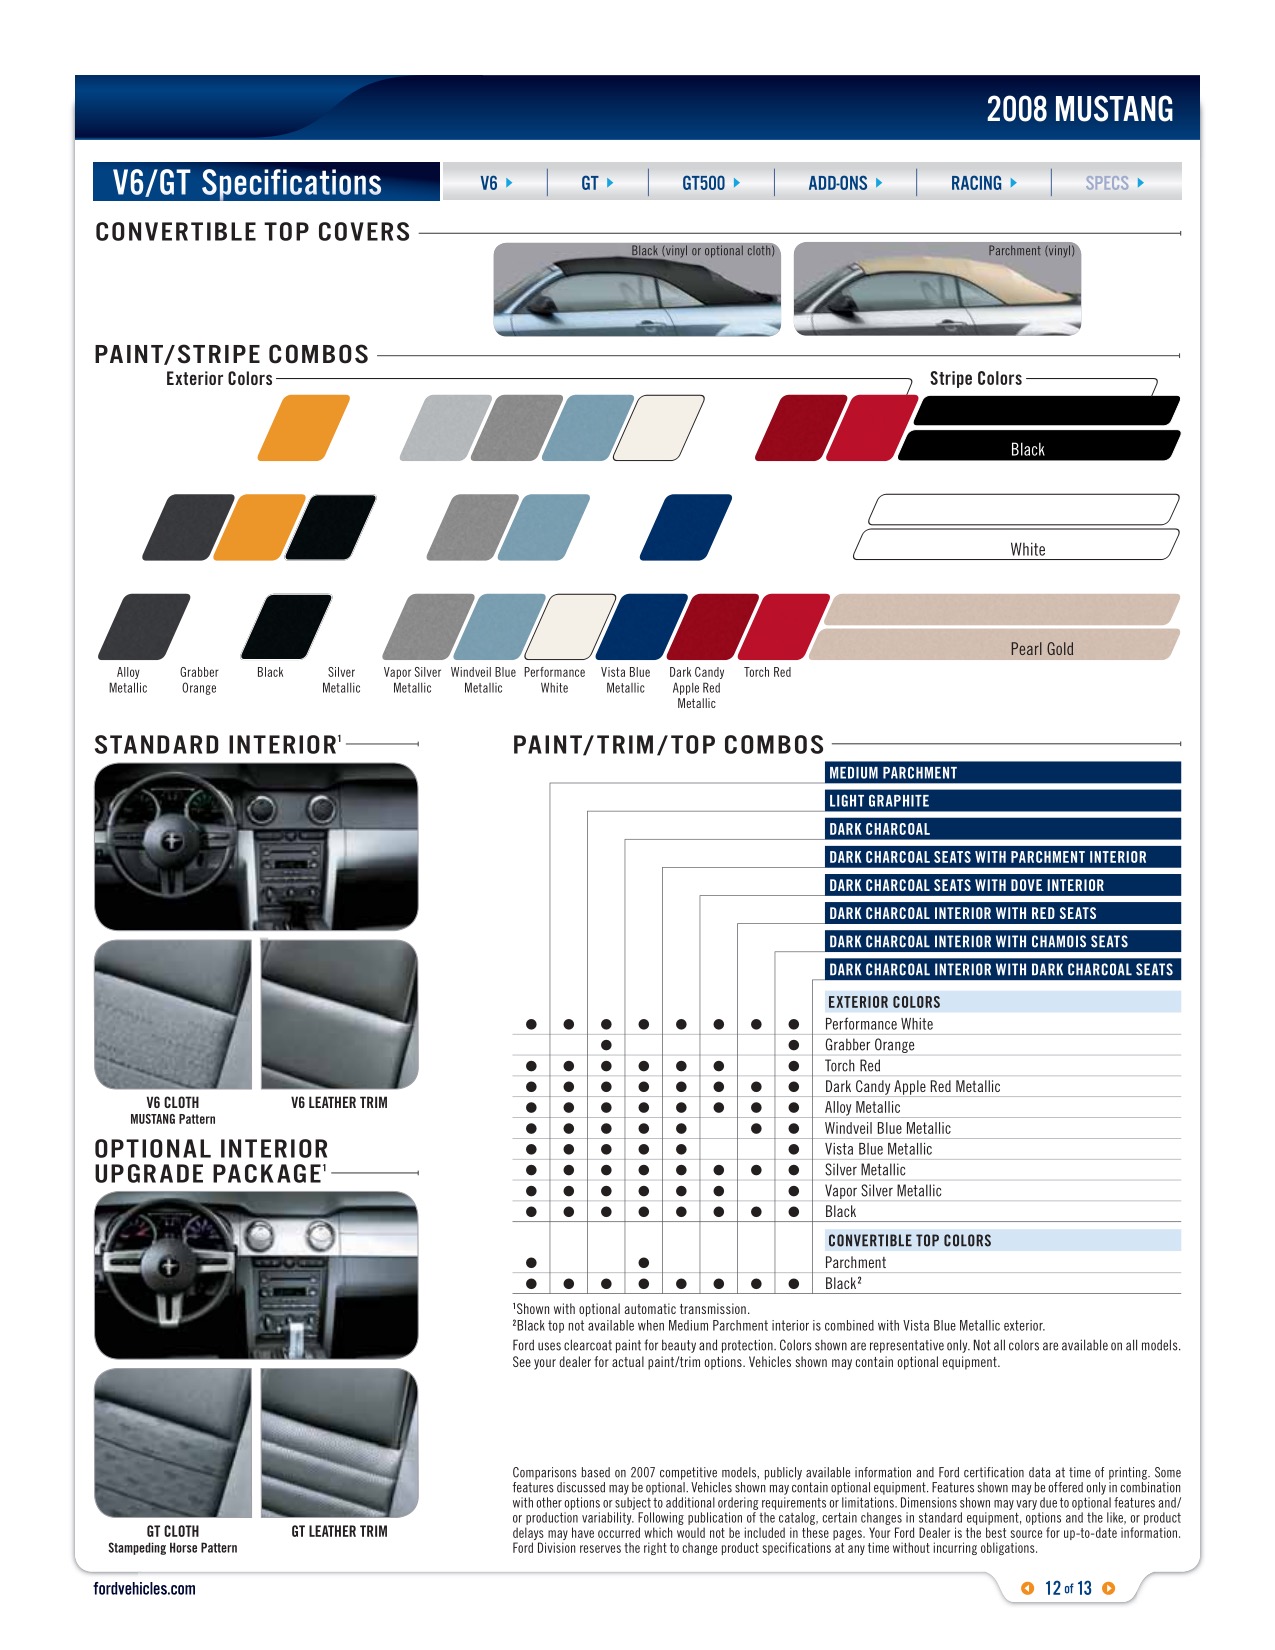 2008 Ford Mustang Brochure Page 1